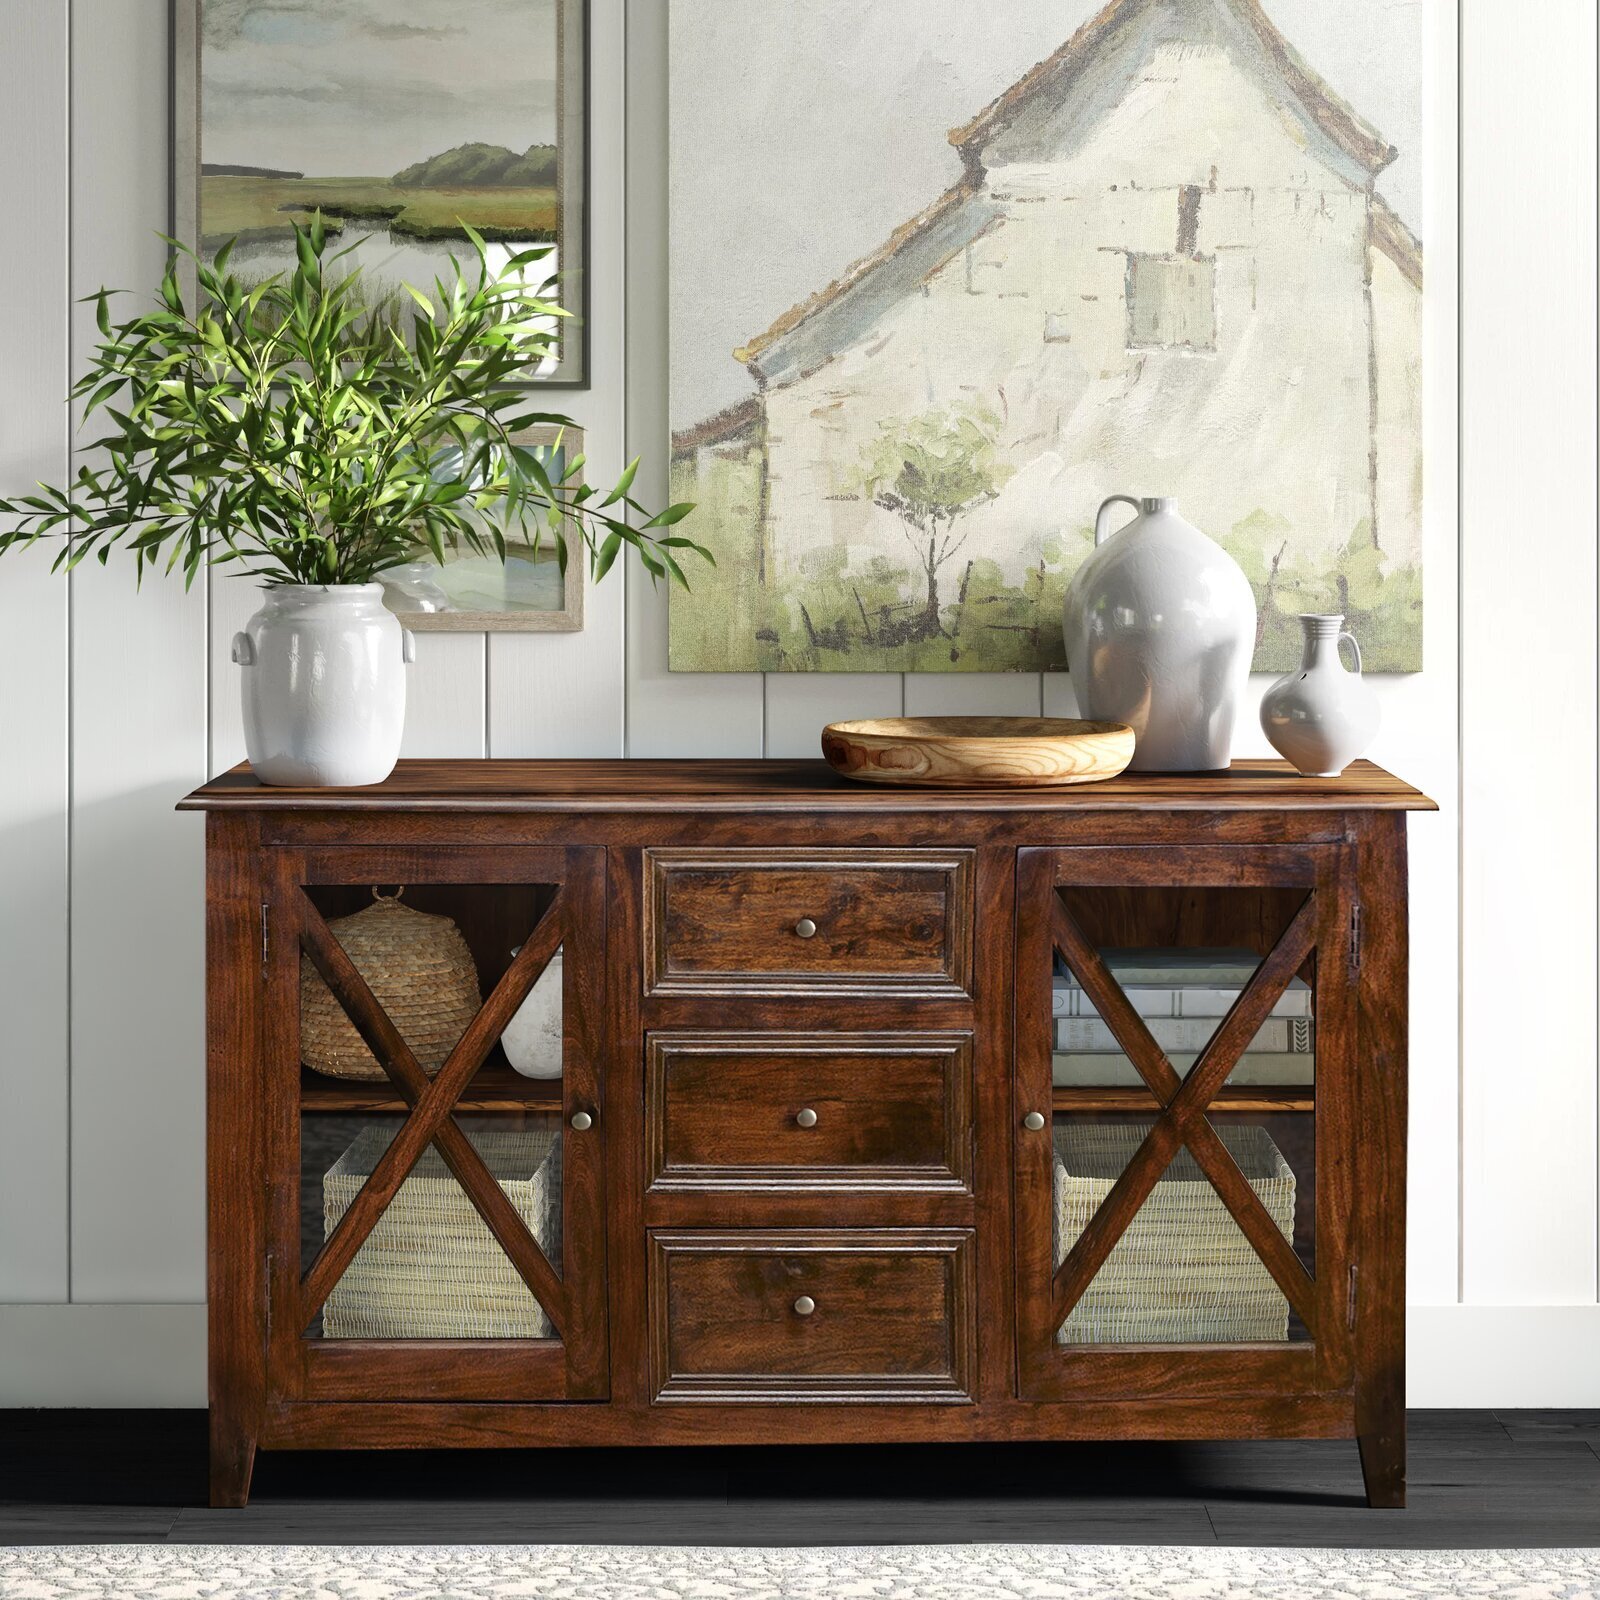 Sideboard buffet in an antique design and different finishes